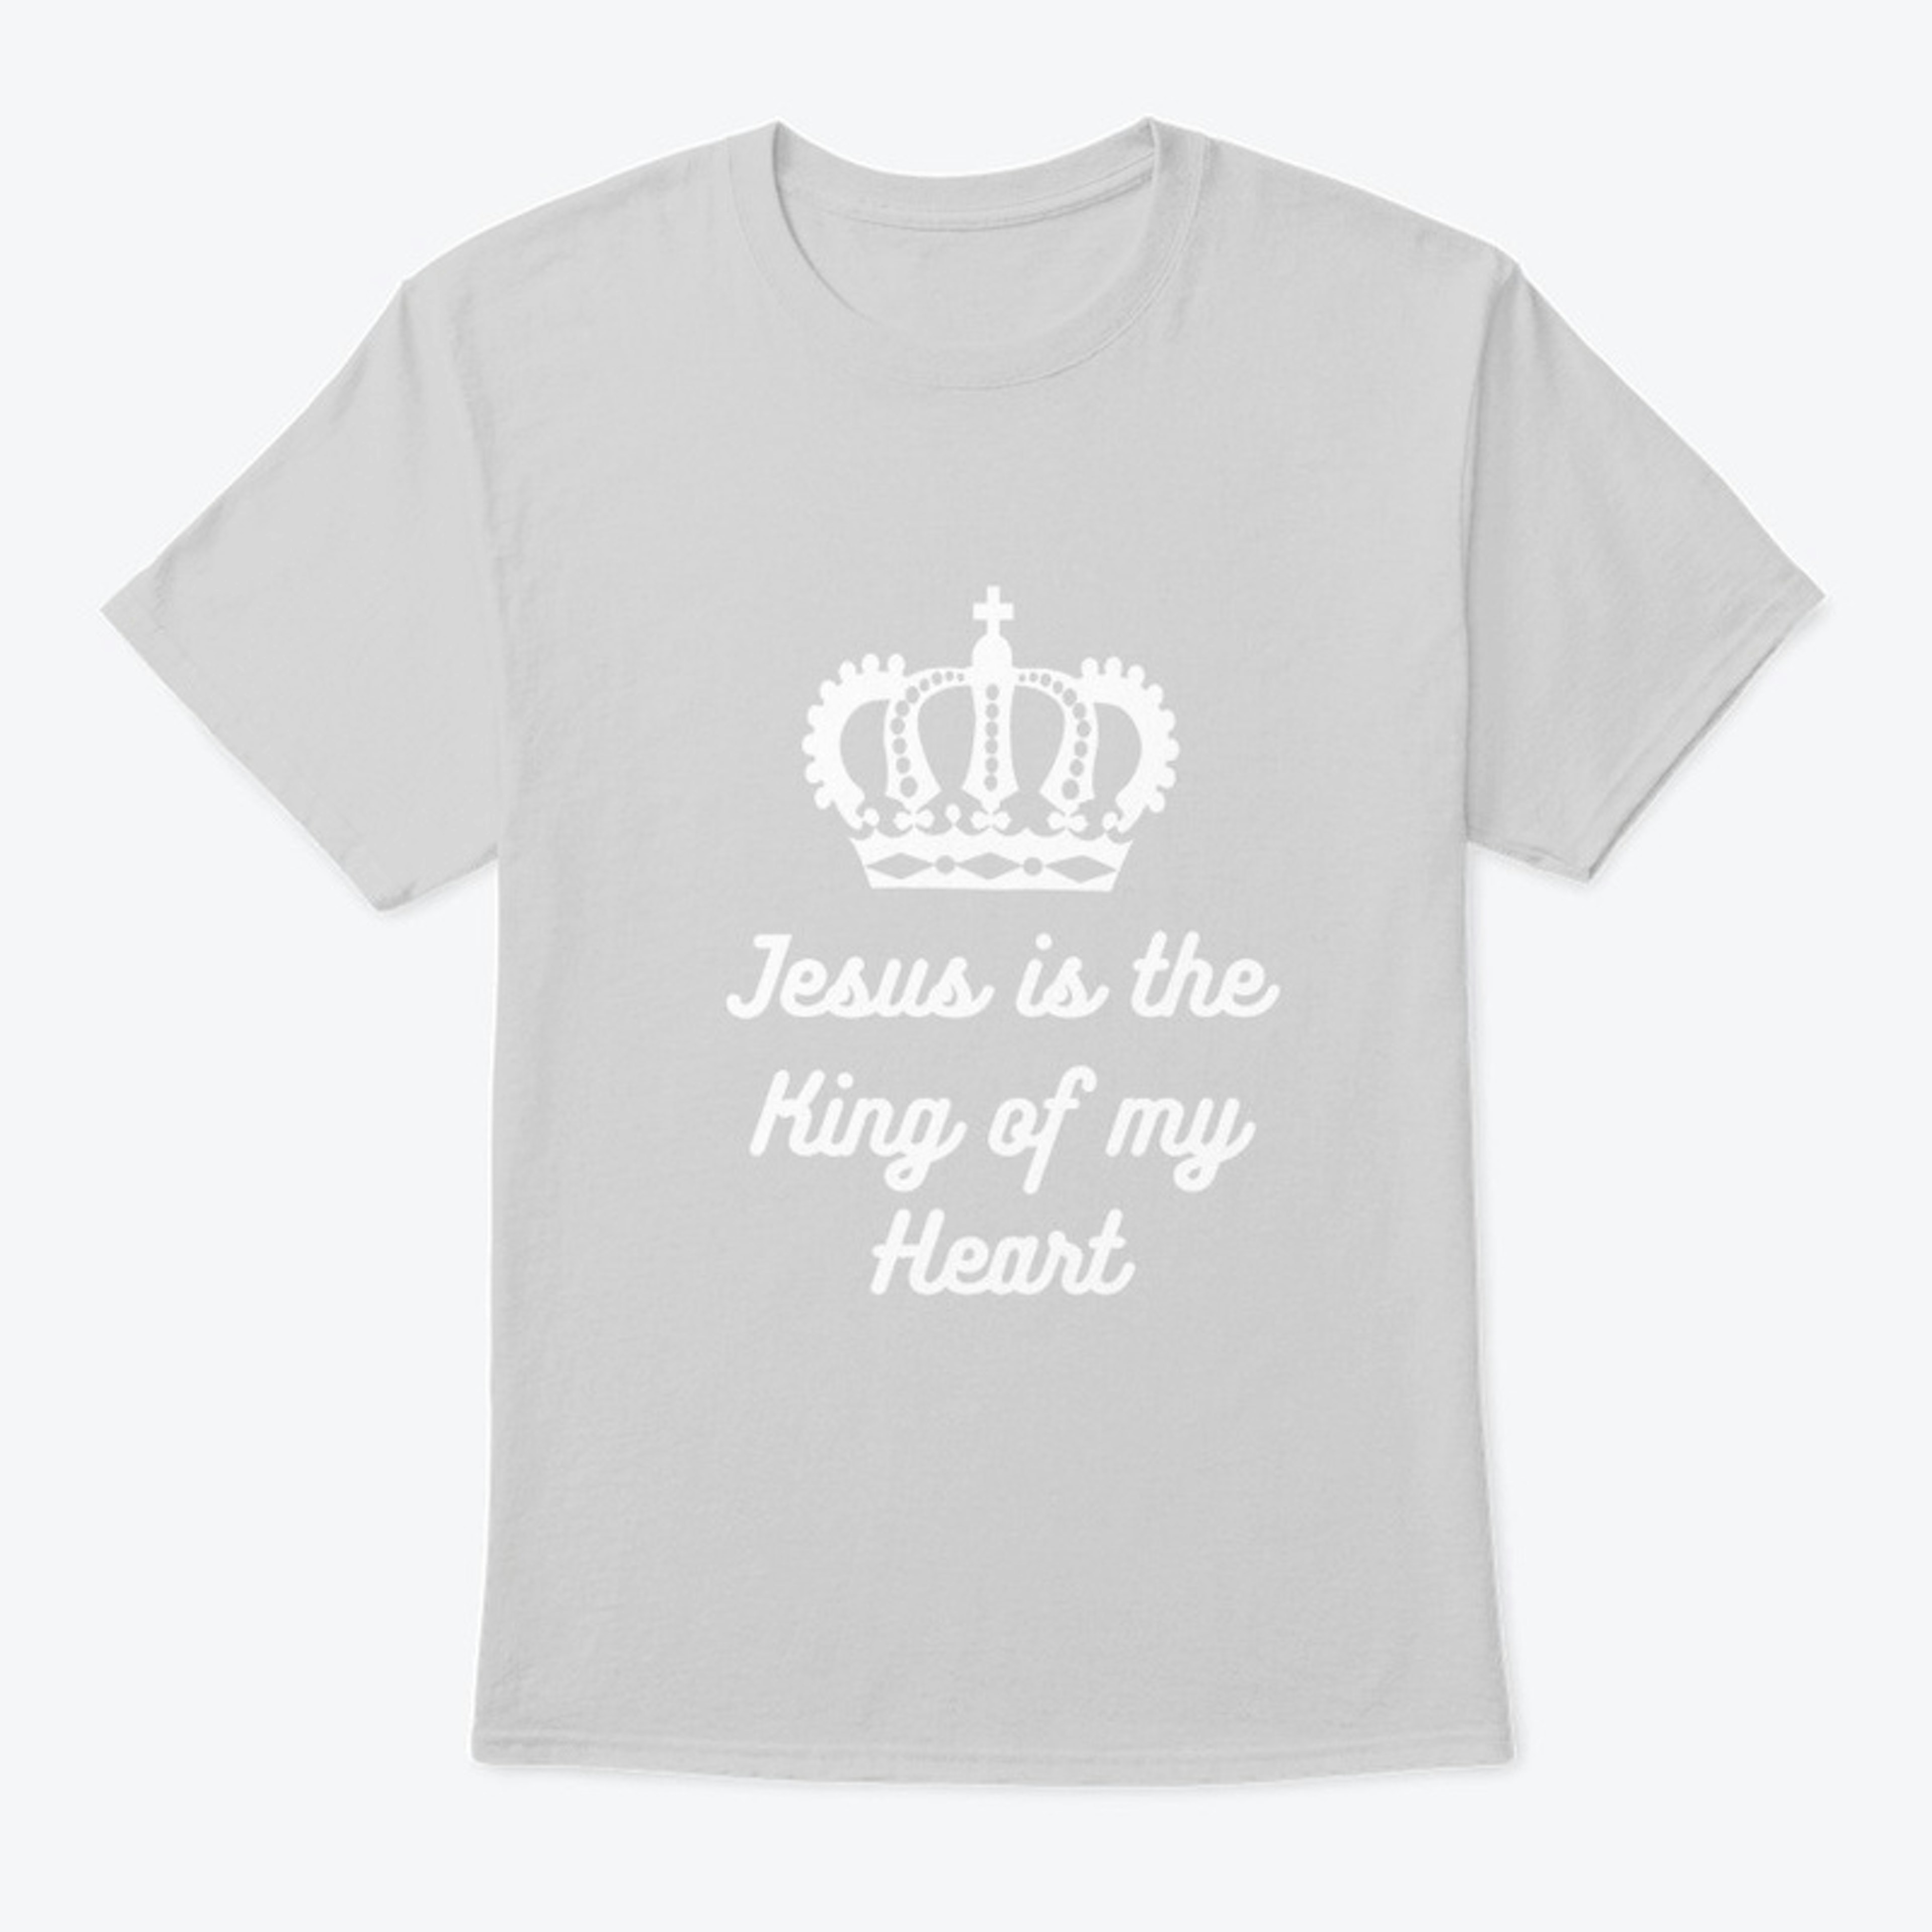 Jesus is the King of my heart 